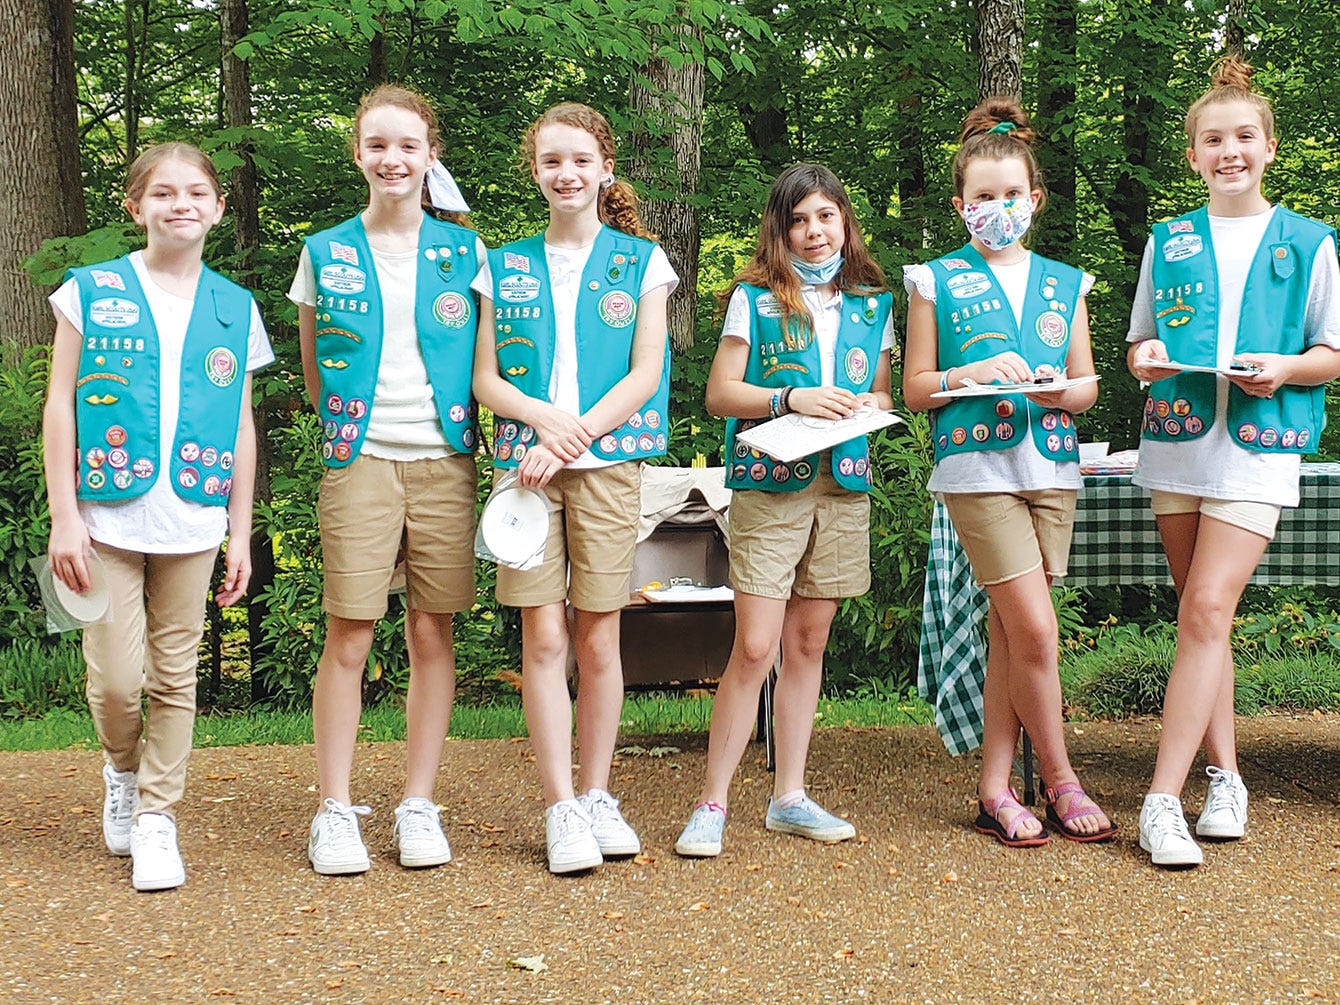 Girl Scouts celebrate with Bridging ceremony, Court of Awards